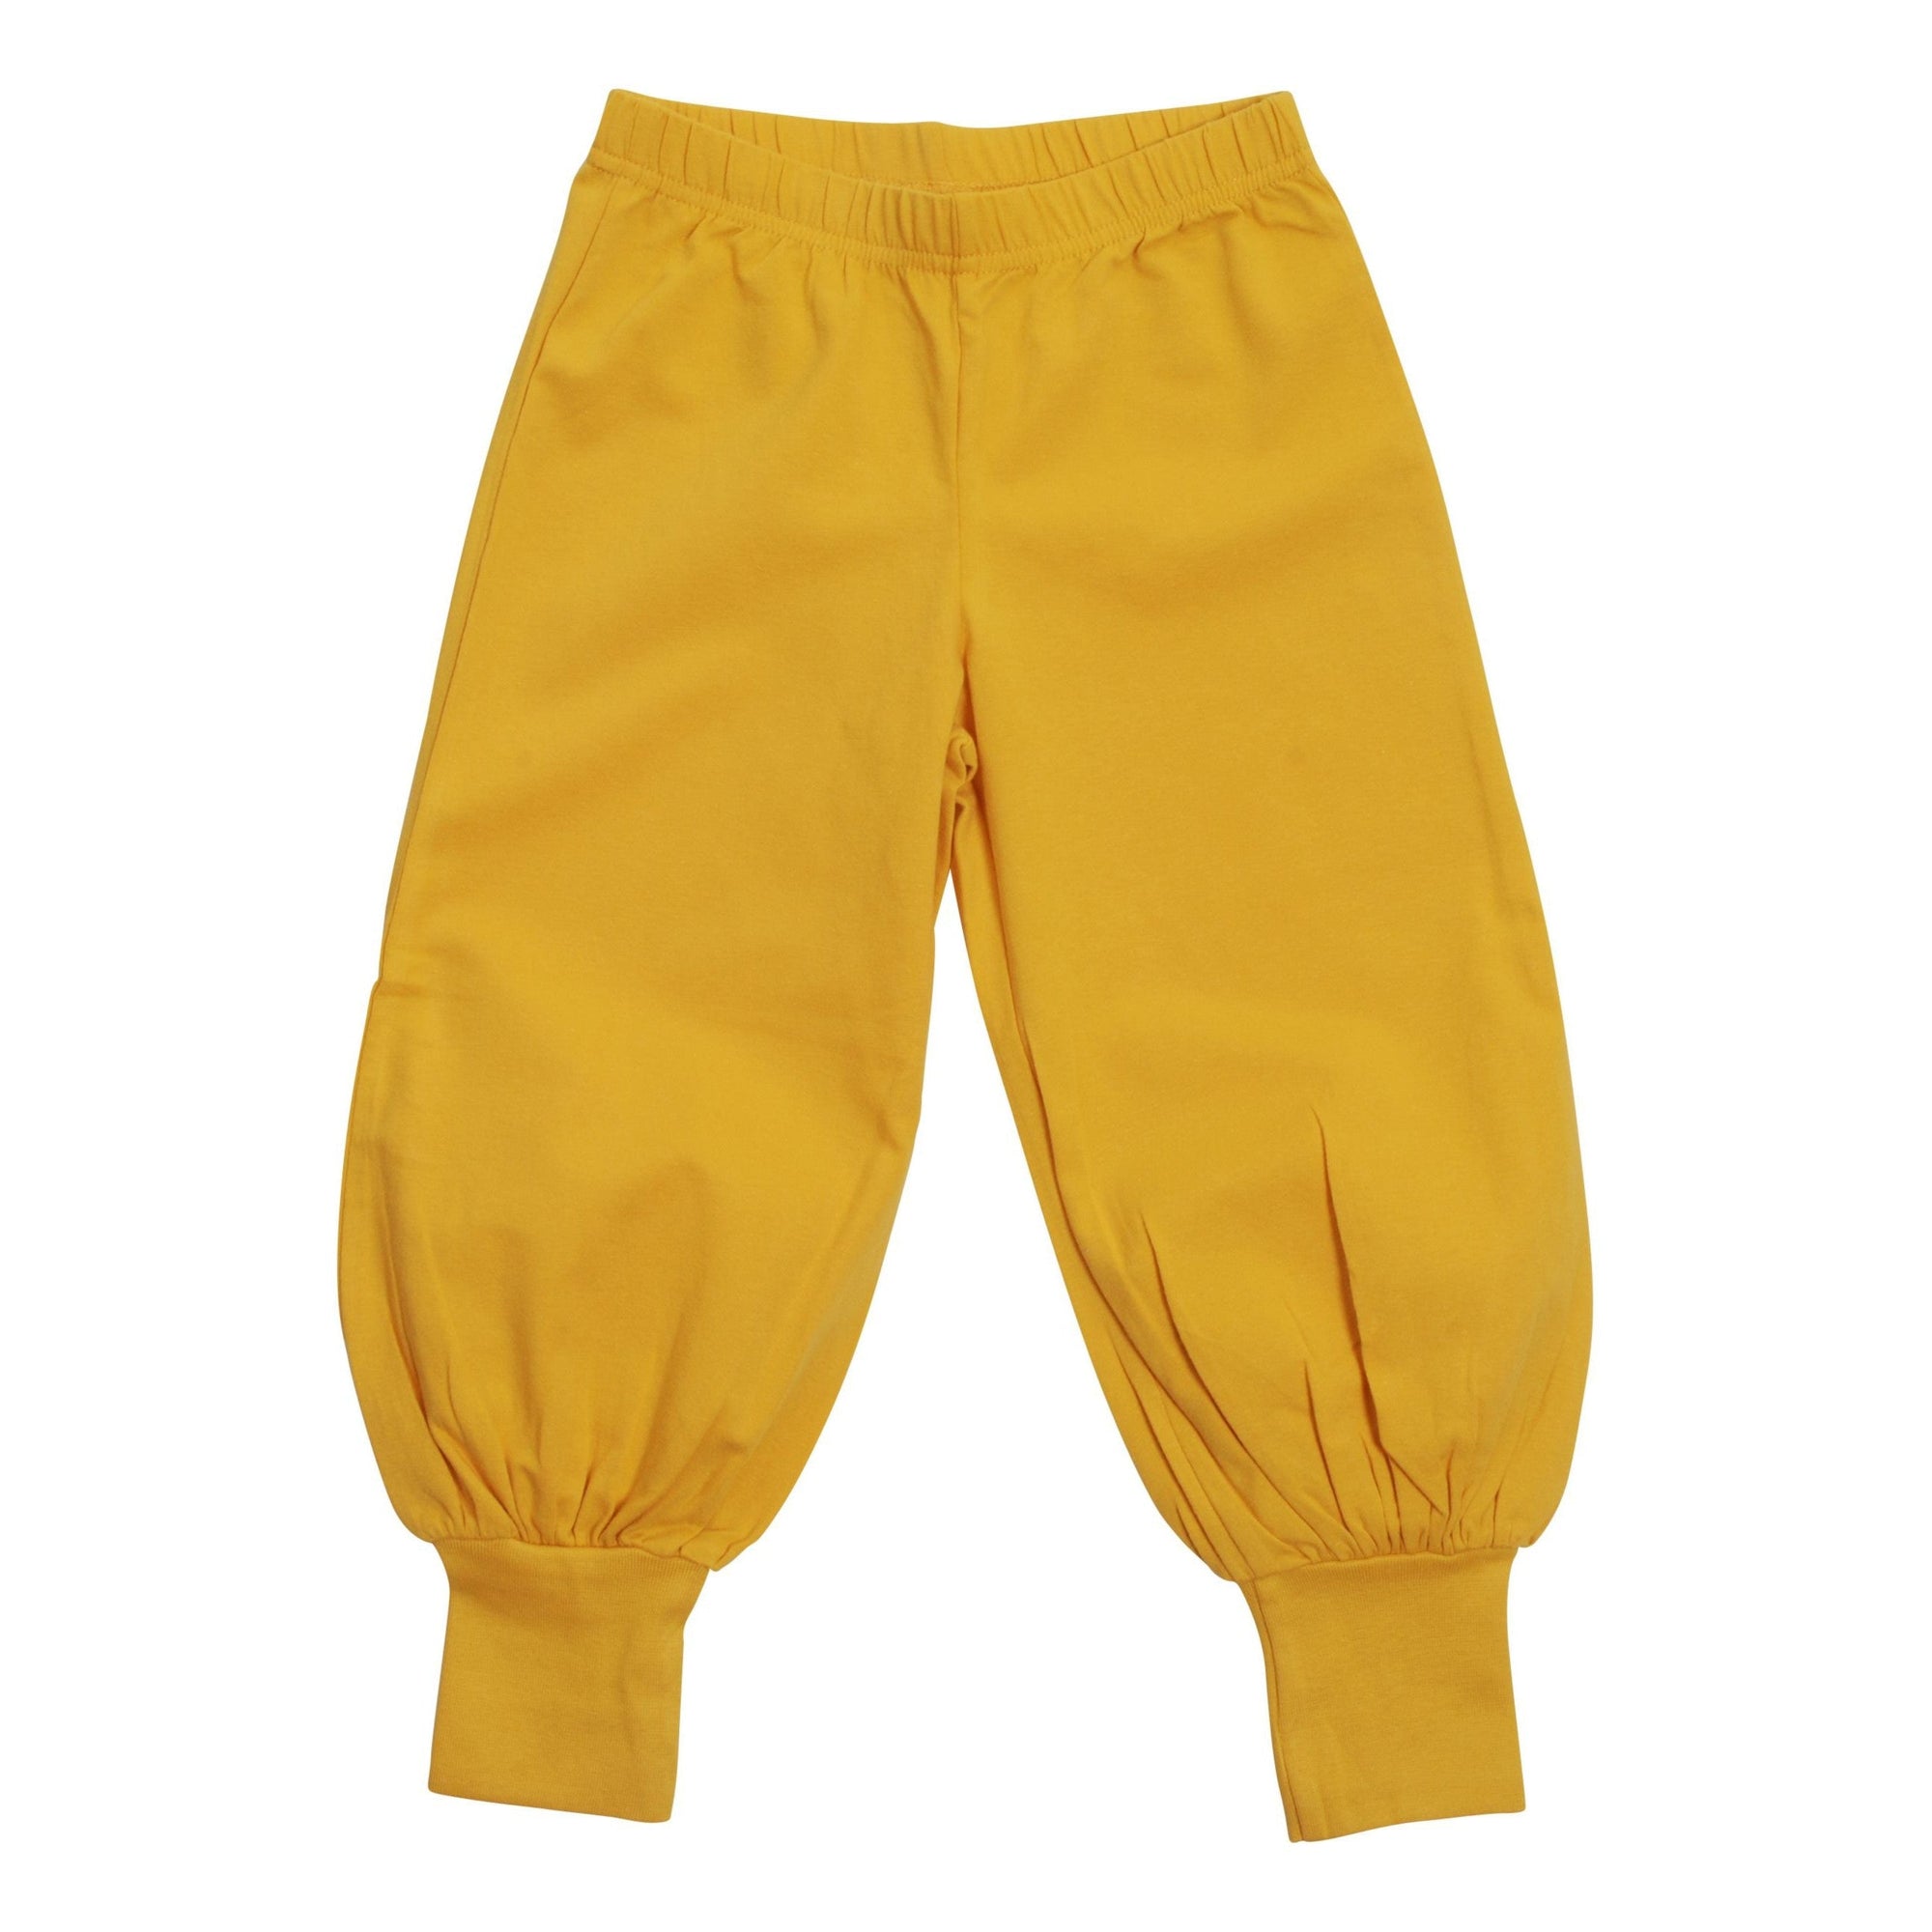 Sunset Gold Baggy Pants - Size 2-4 years (104 cm) - SECONDS-Warehouse Find-Modern Rascals